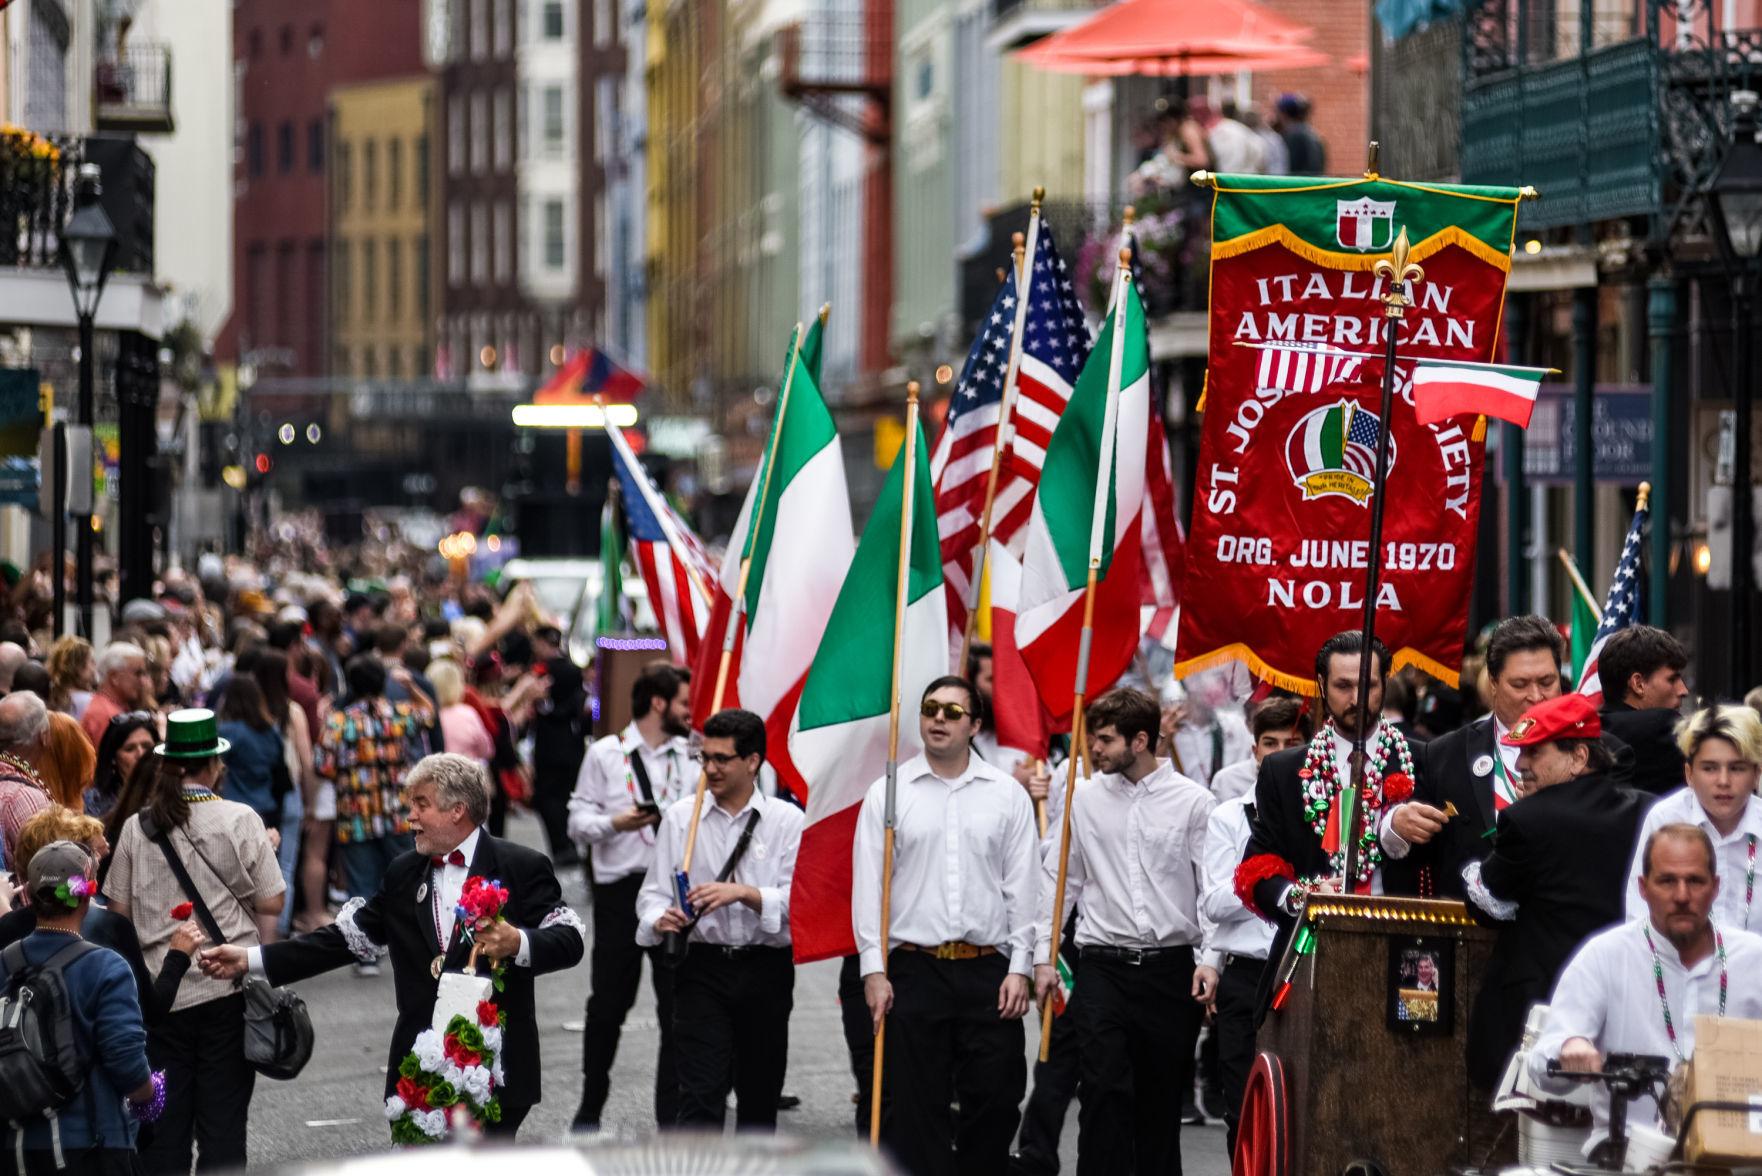 St. Joseph's Day parade and gala are called off again as club waits out